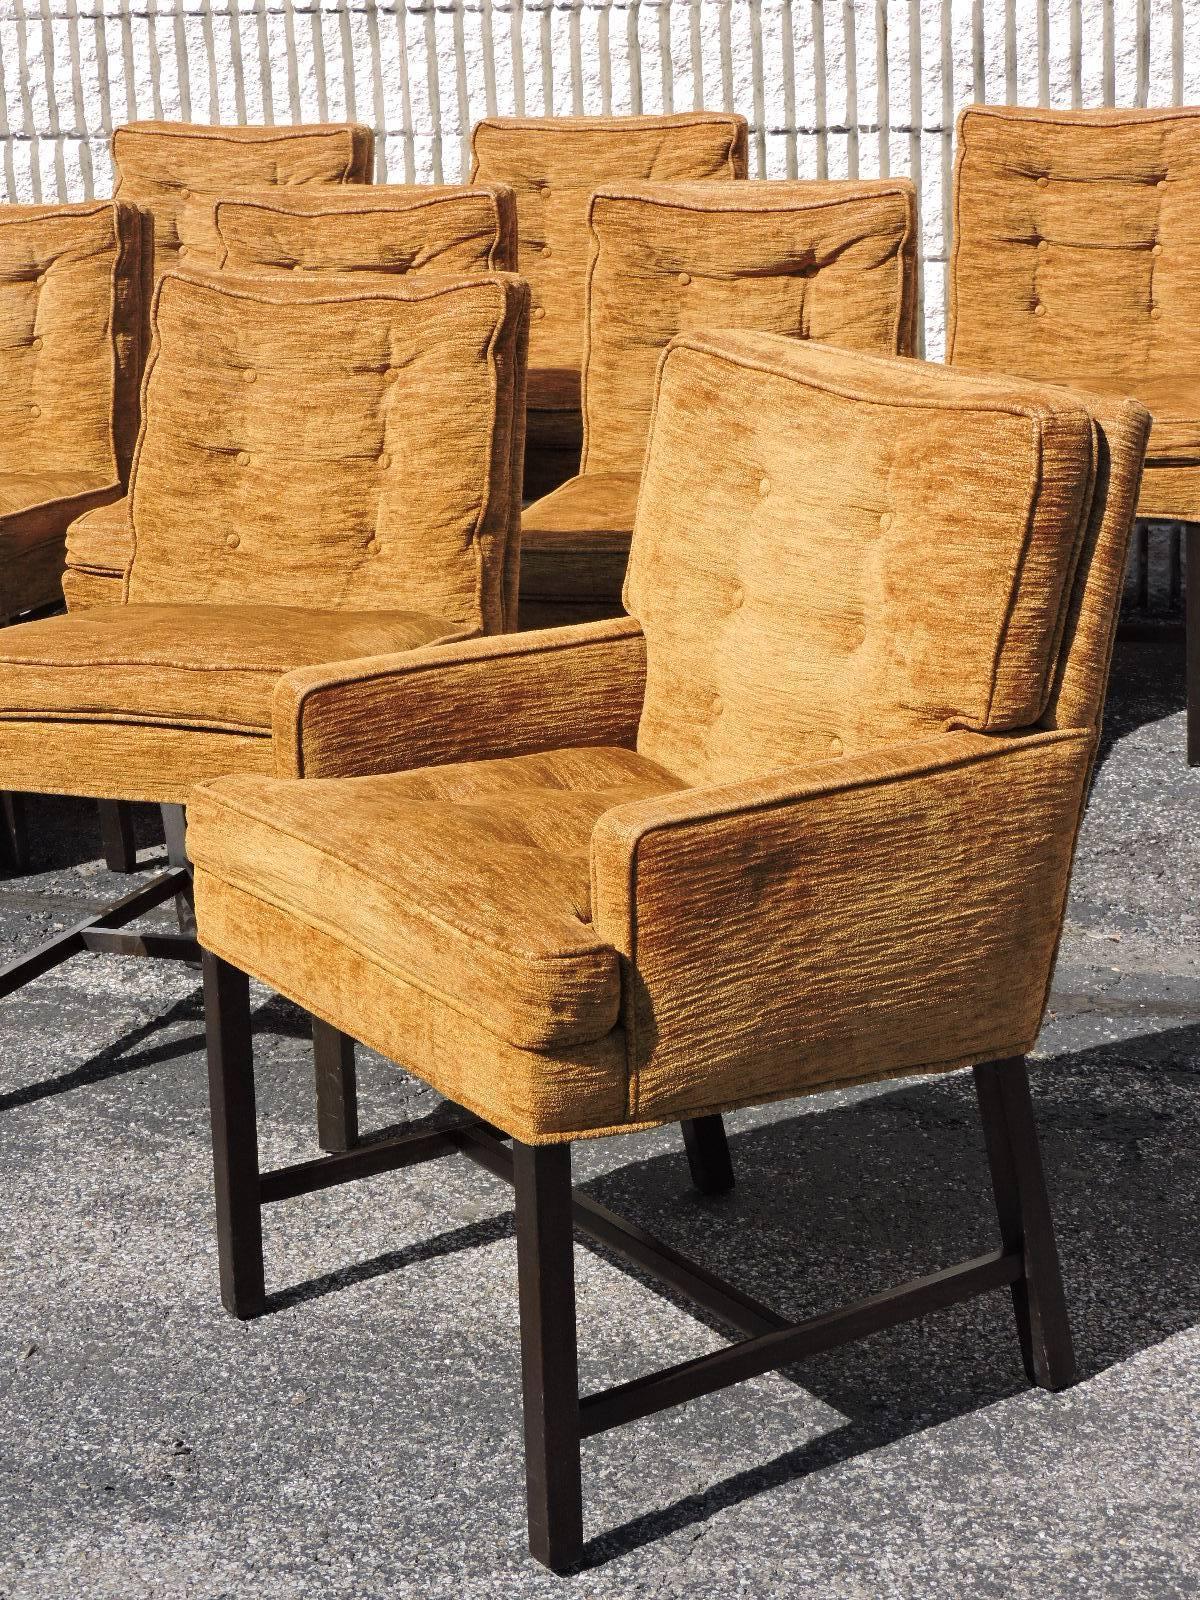 A hard to find set of 12 dining chairs by Harvey Probber for Directional consisting of ten side chairs - measuring (32